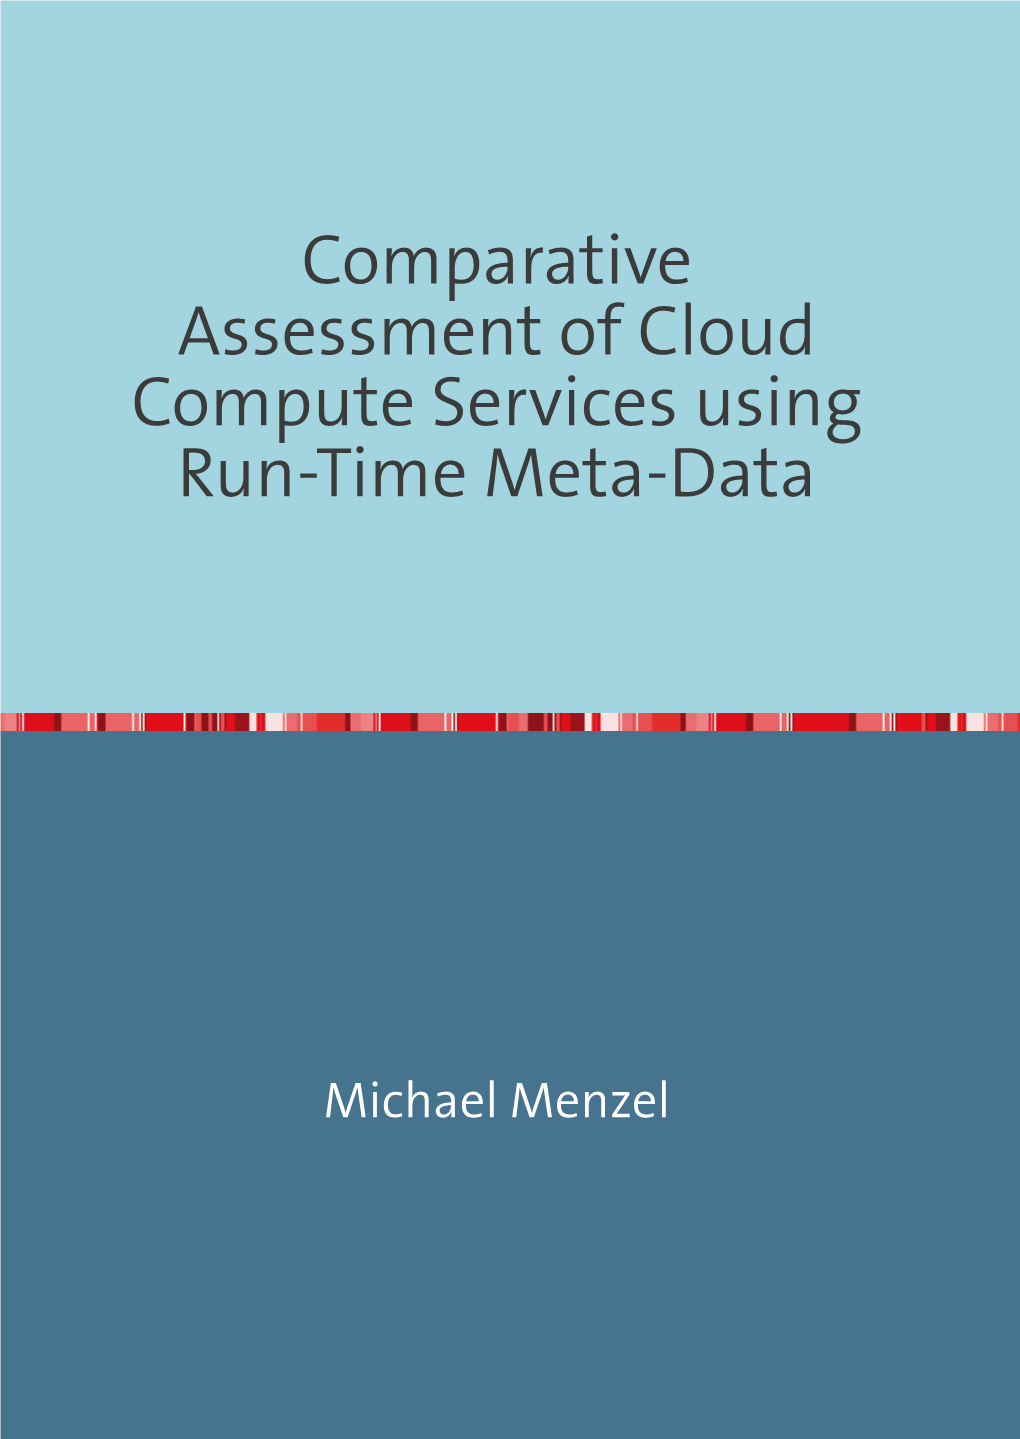 Comparative Assessment of Cloud Compute Services Using Run-Time Meta-Data